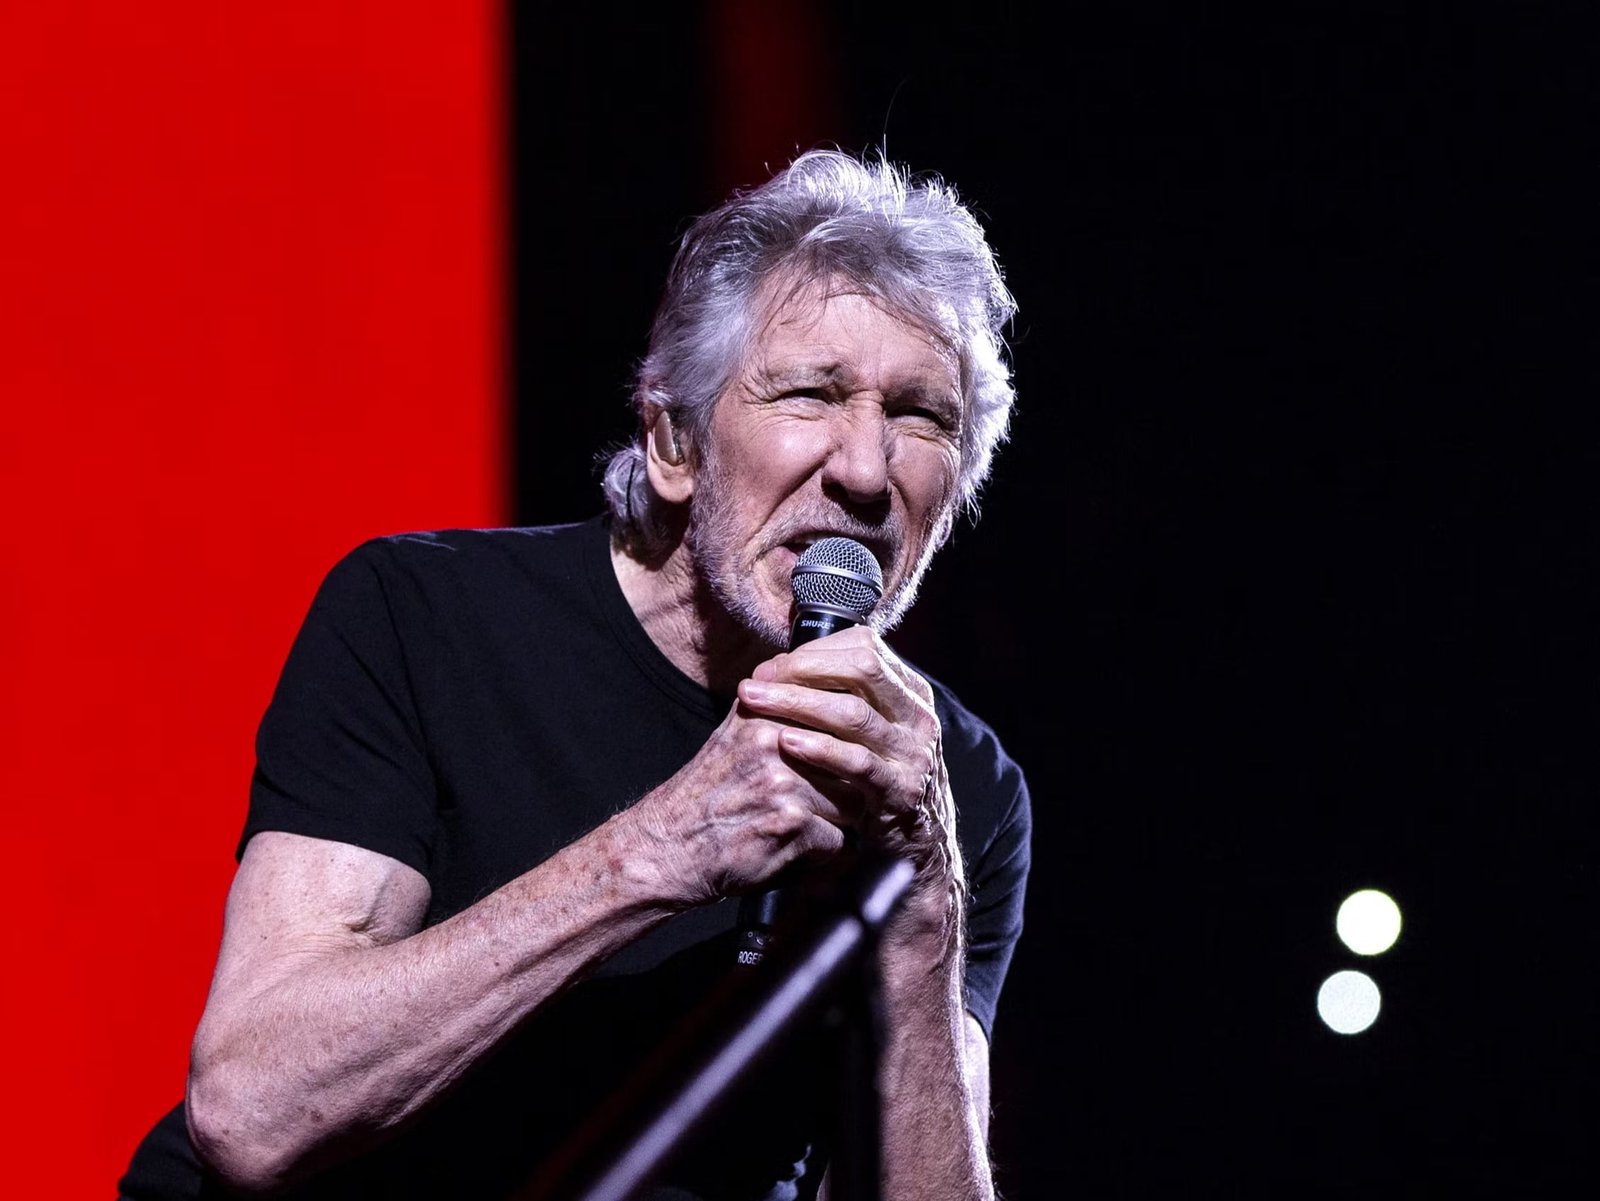 Berlin Police Investigate Roger Waters' Alleged Nazi-Style Uniform At Concert